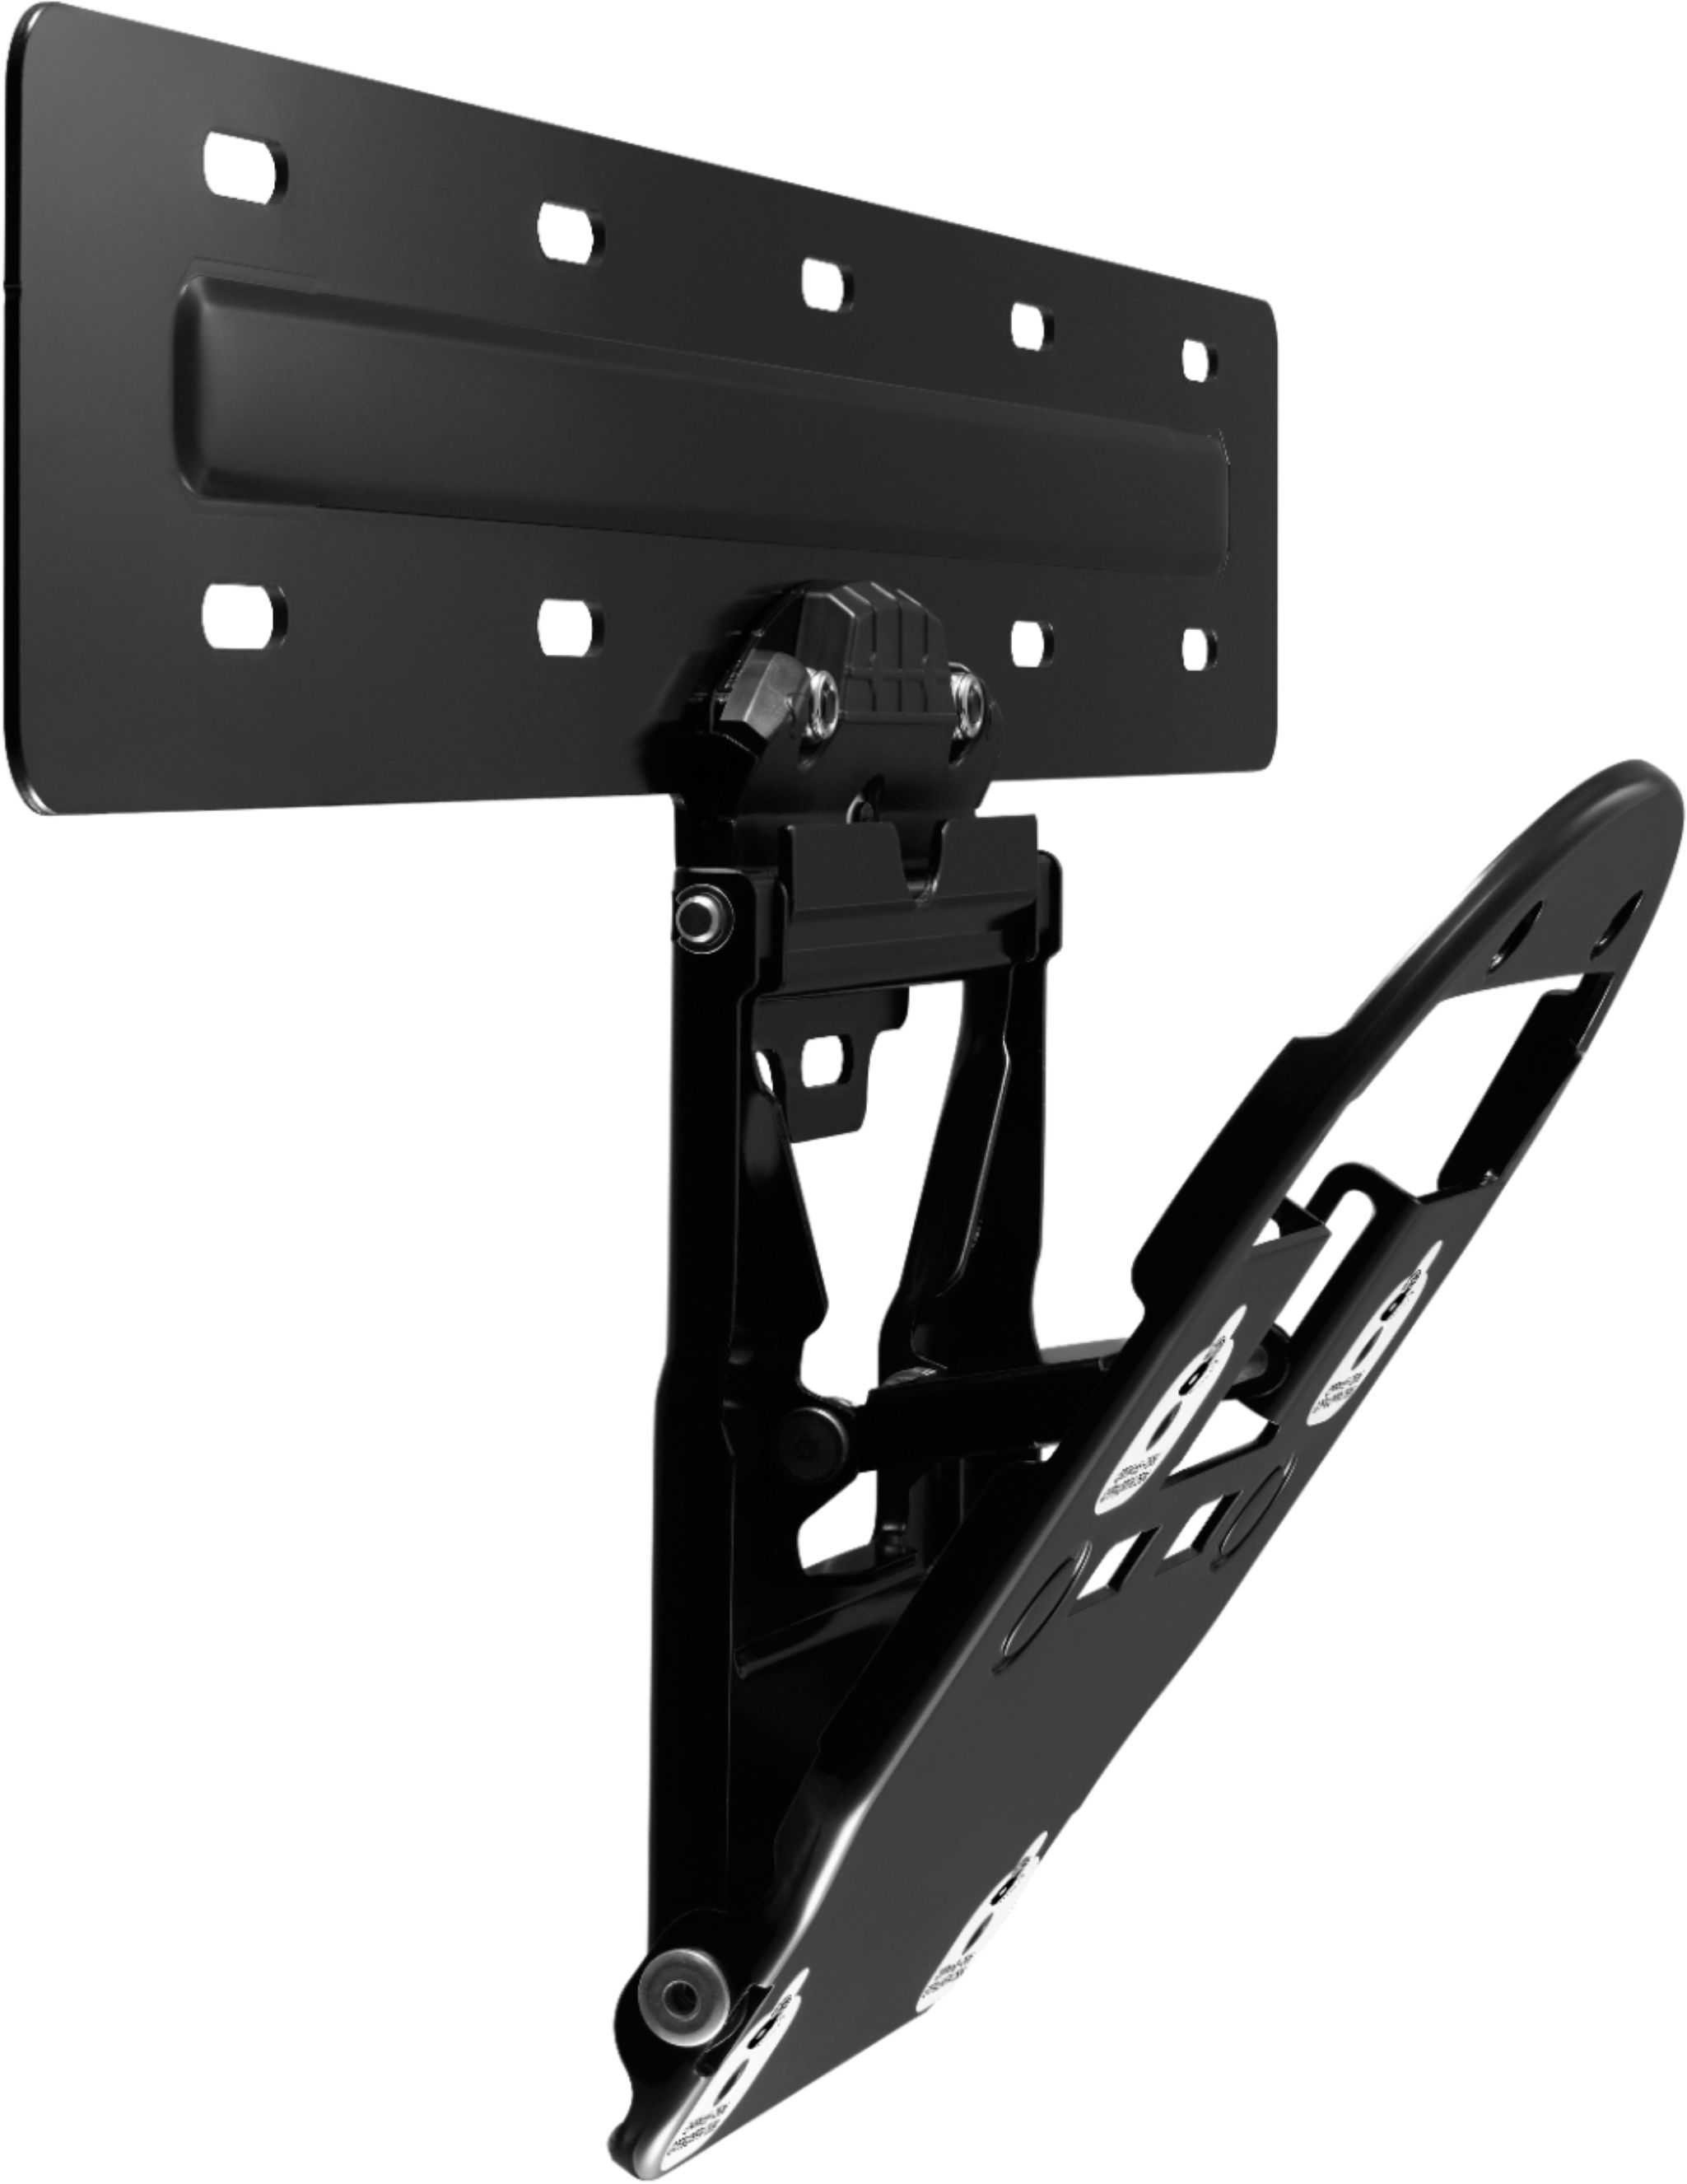 Angle View: Samsung - No Gap Tilting TV Wall Mount for Most 49", 55" and 65" TVs - Black